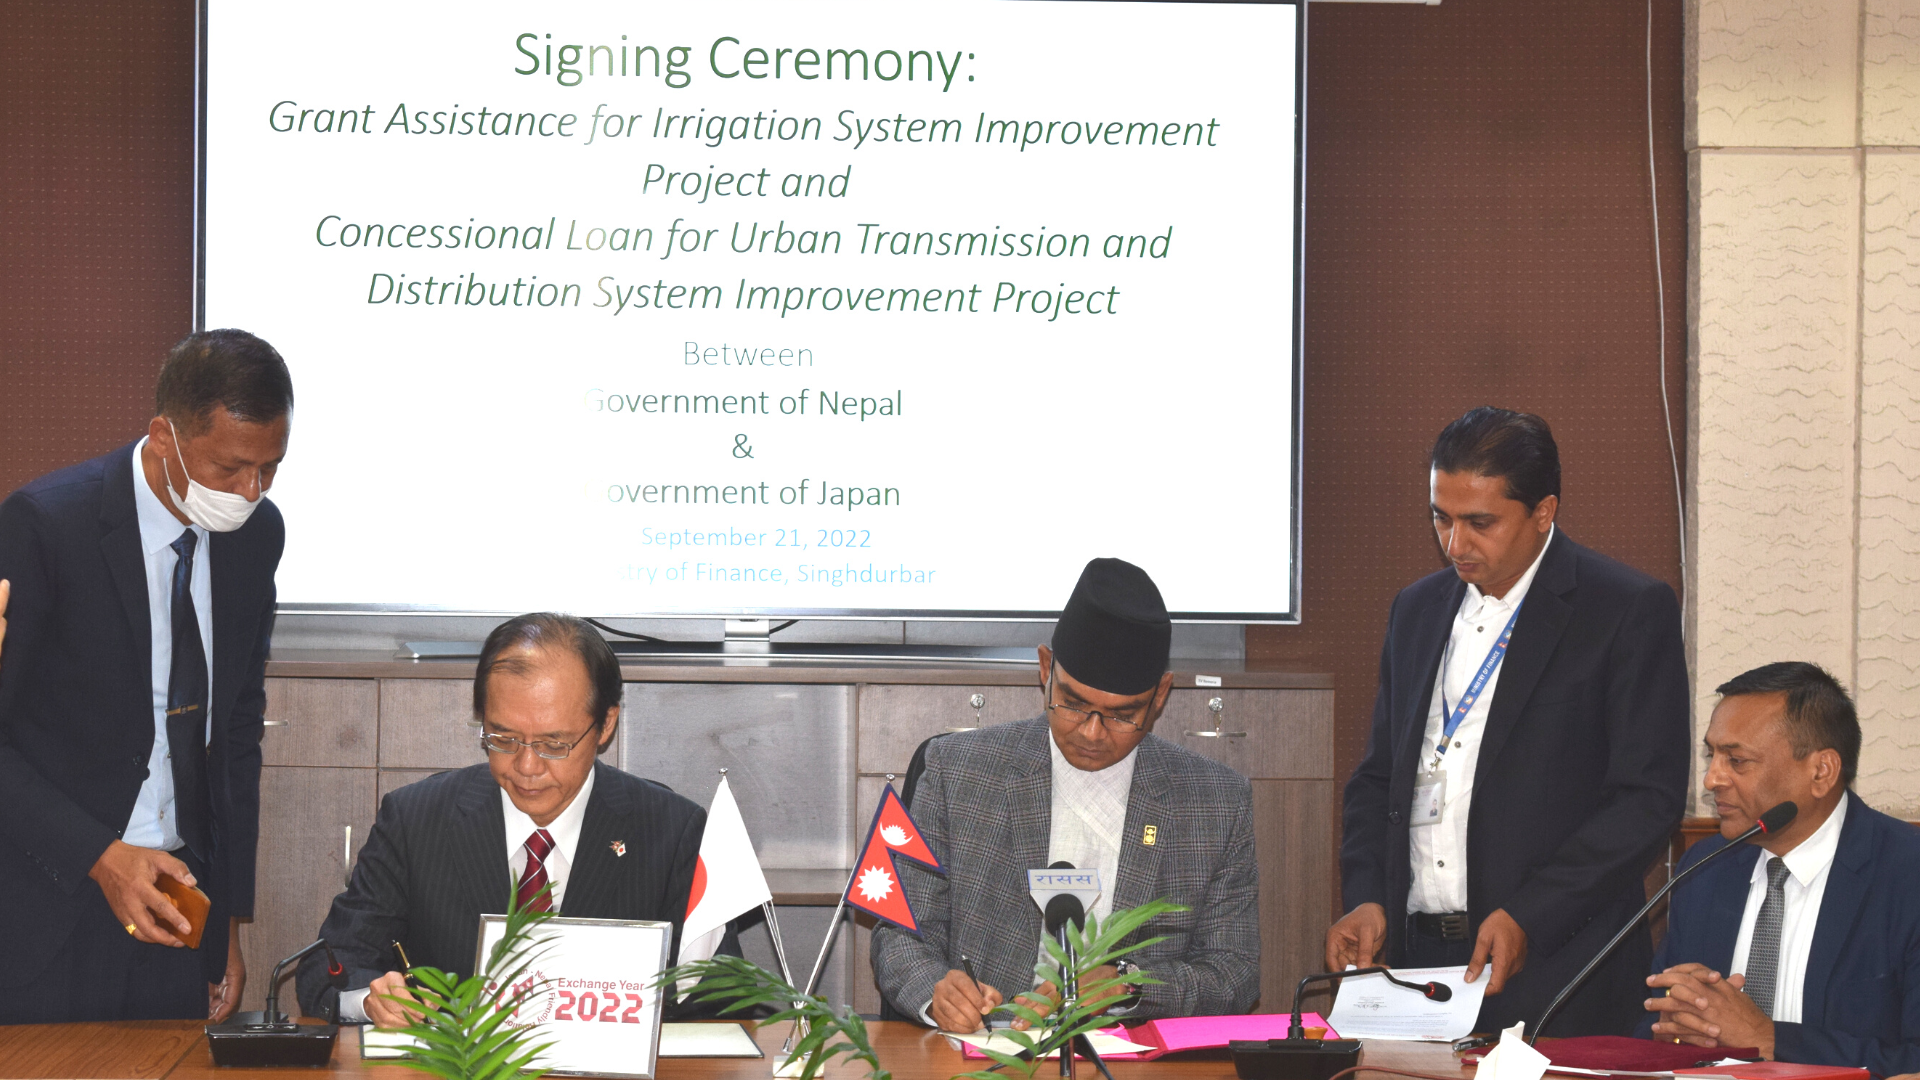 Nepal and Japan sign two agreements for improving irrigation and urban electricity distribution